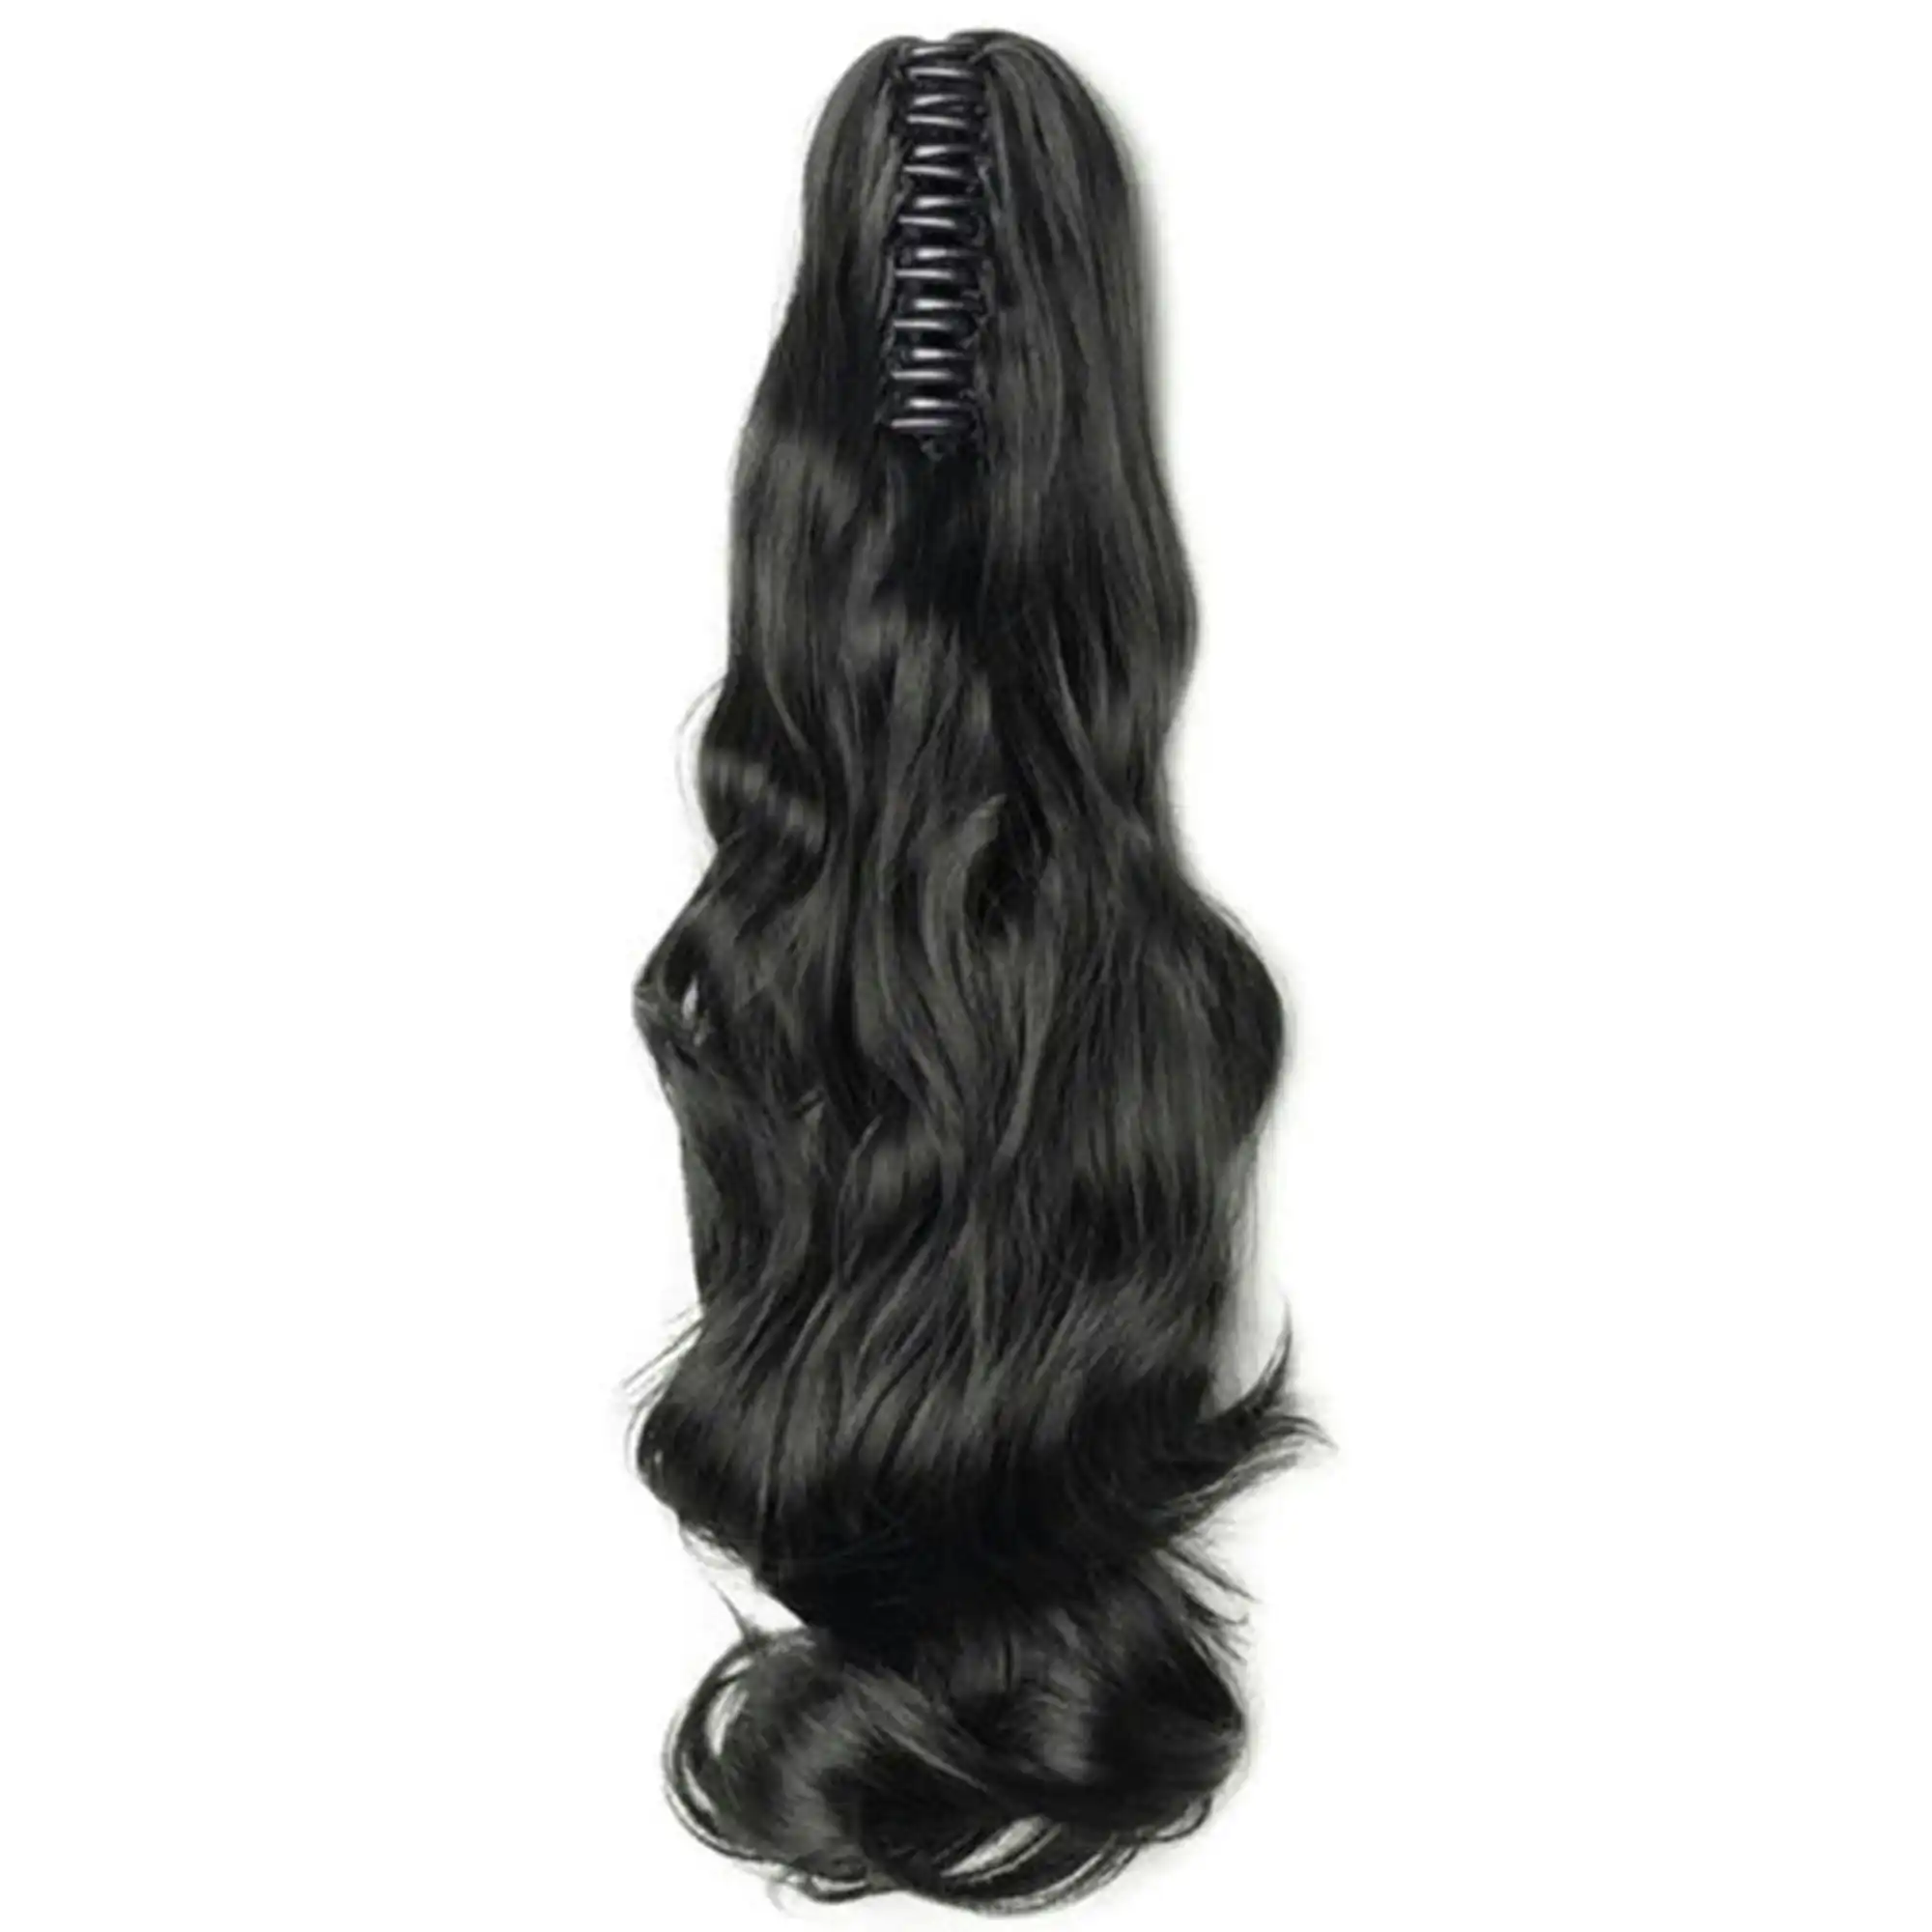 22" Hair Extension Black High Grade Ponytail Ribbon Clamp Claw Wavy